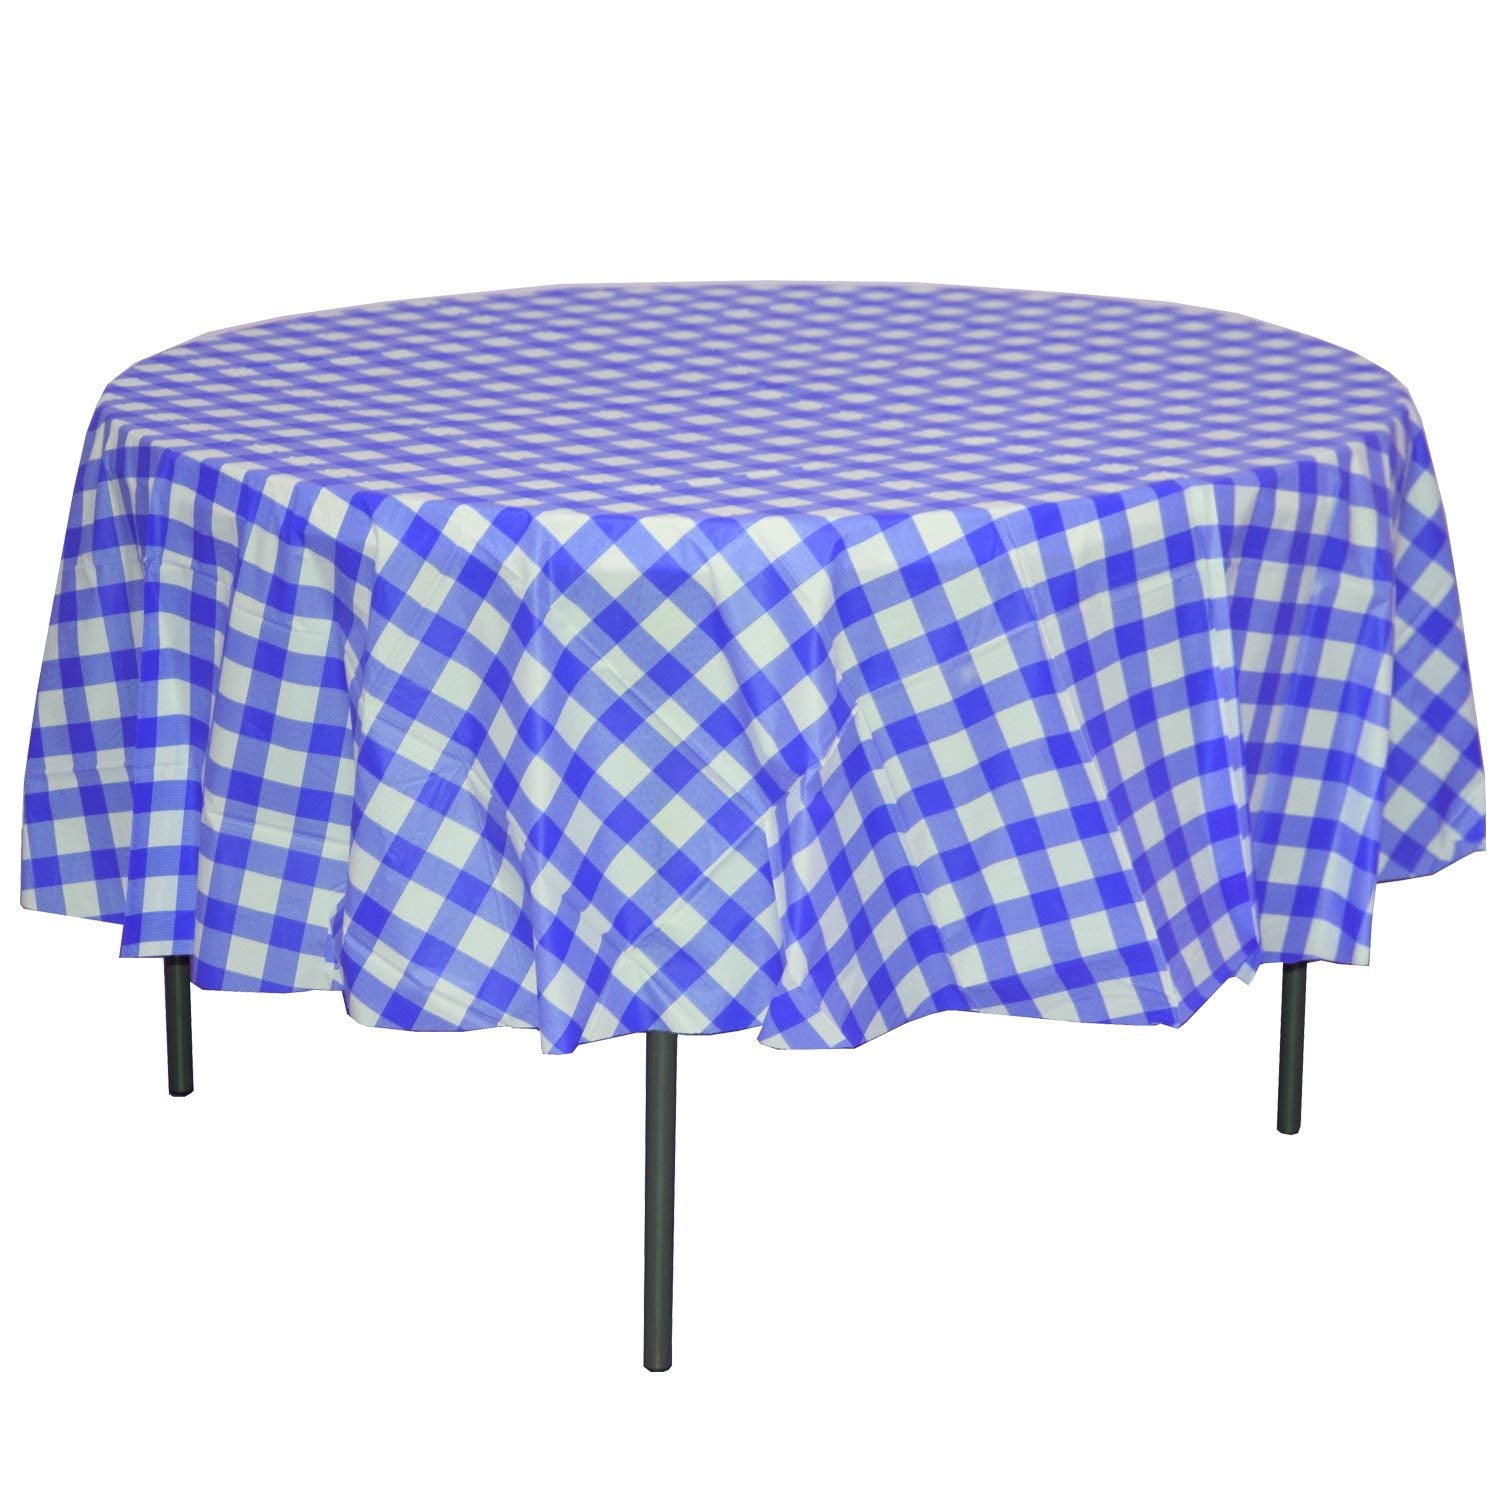 1.6m Fitted Round Elastic Edge Table Cover Wedding Party Banquets Tablecloth UK 